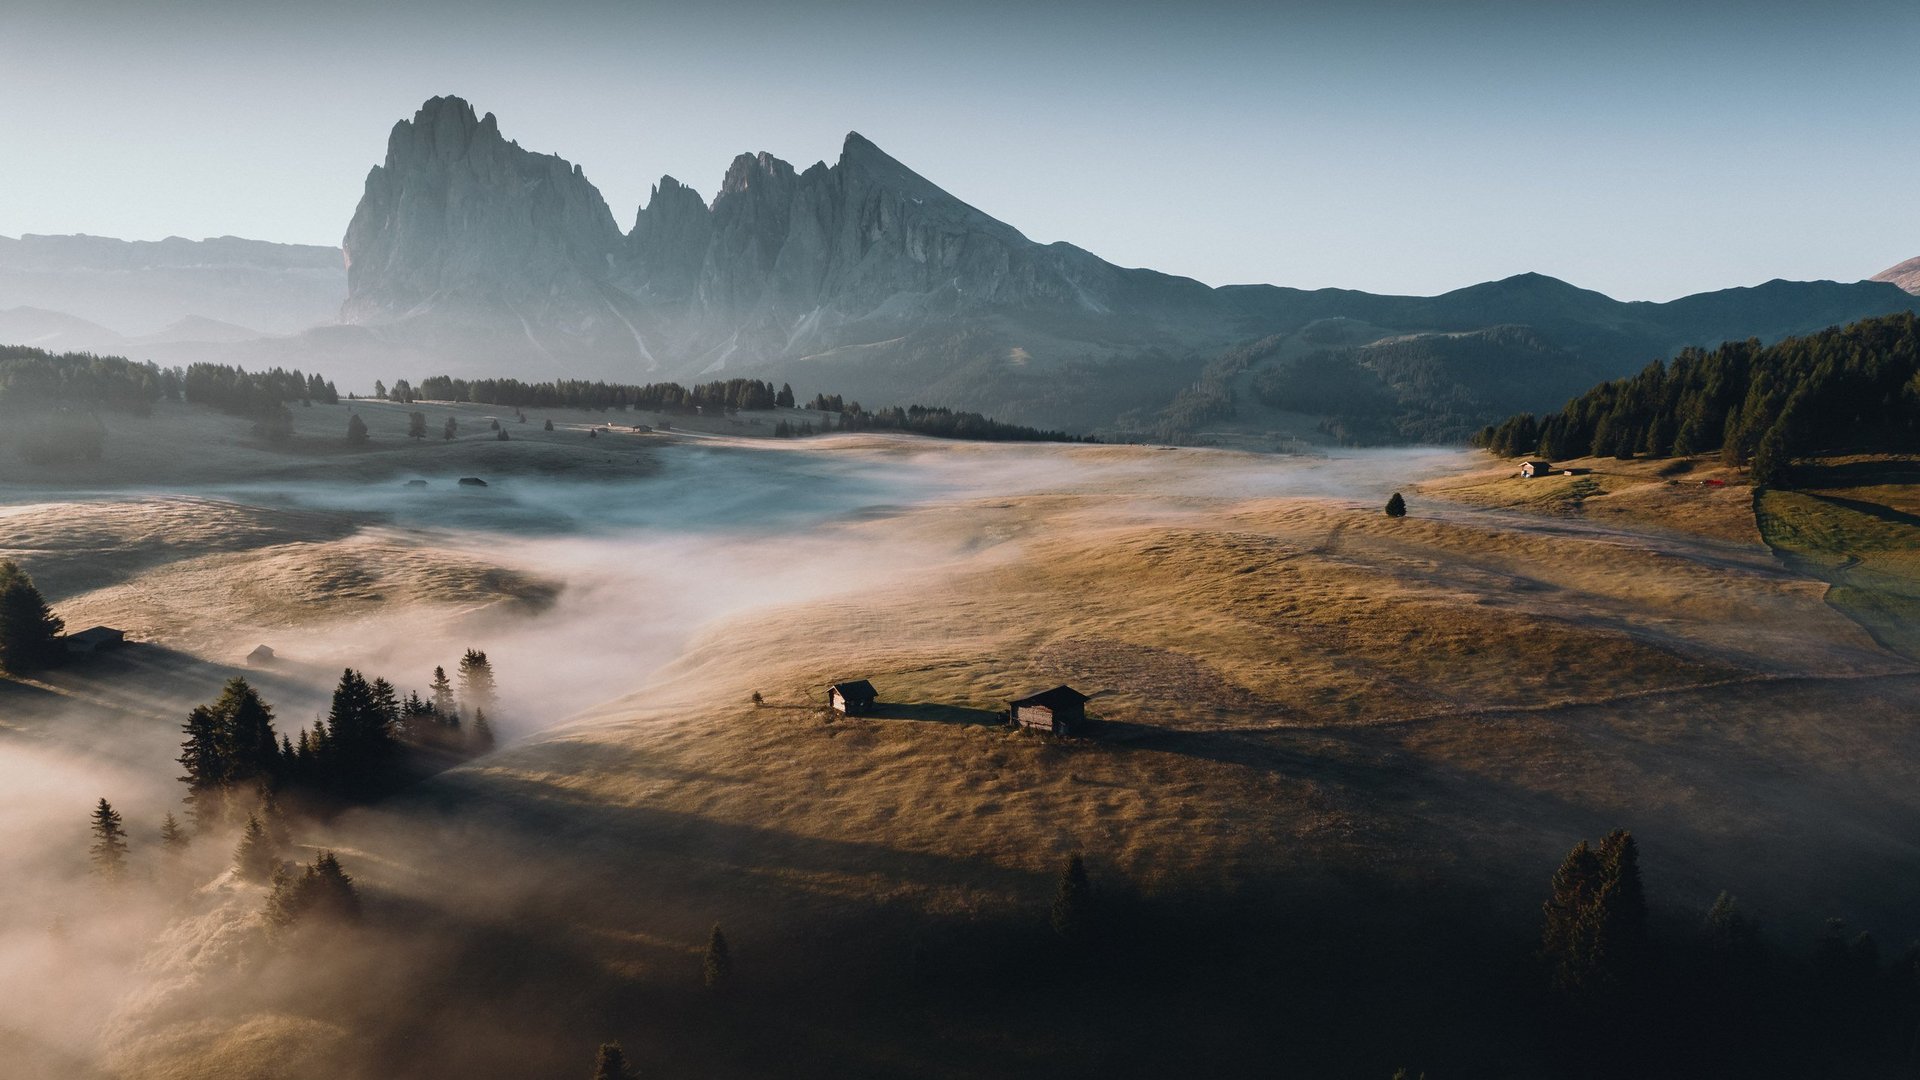 How to reach your getaway on Alpe di Siusi in South Tyrol